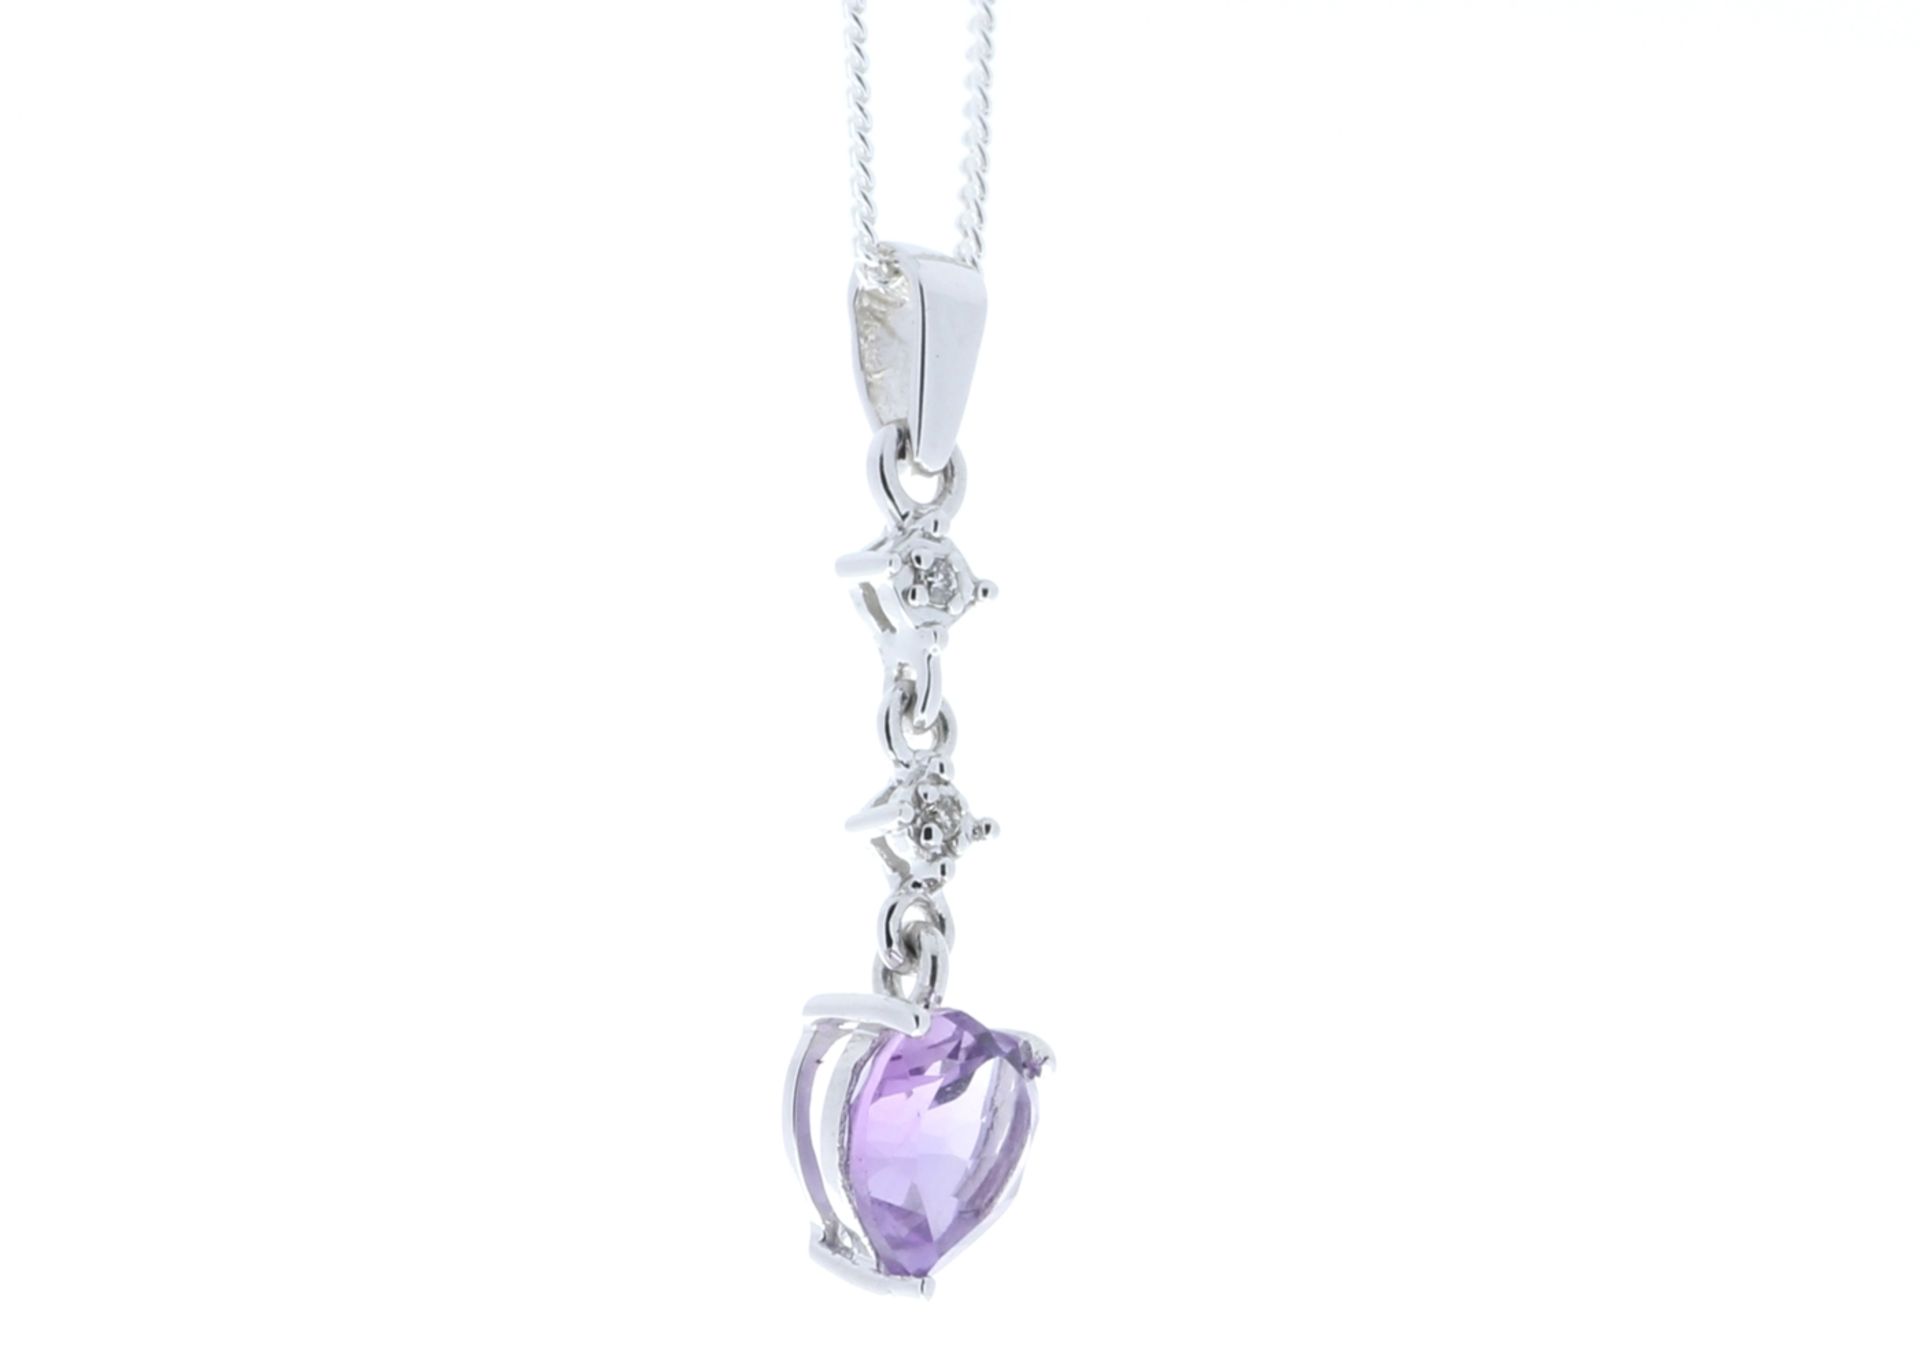 9ct White Gold Amethyst Heart Shape Diamond Pendant 0.01 Carats - Valued by GIE £420.00 - This - Image 4 of 5